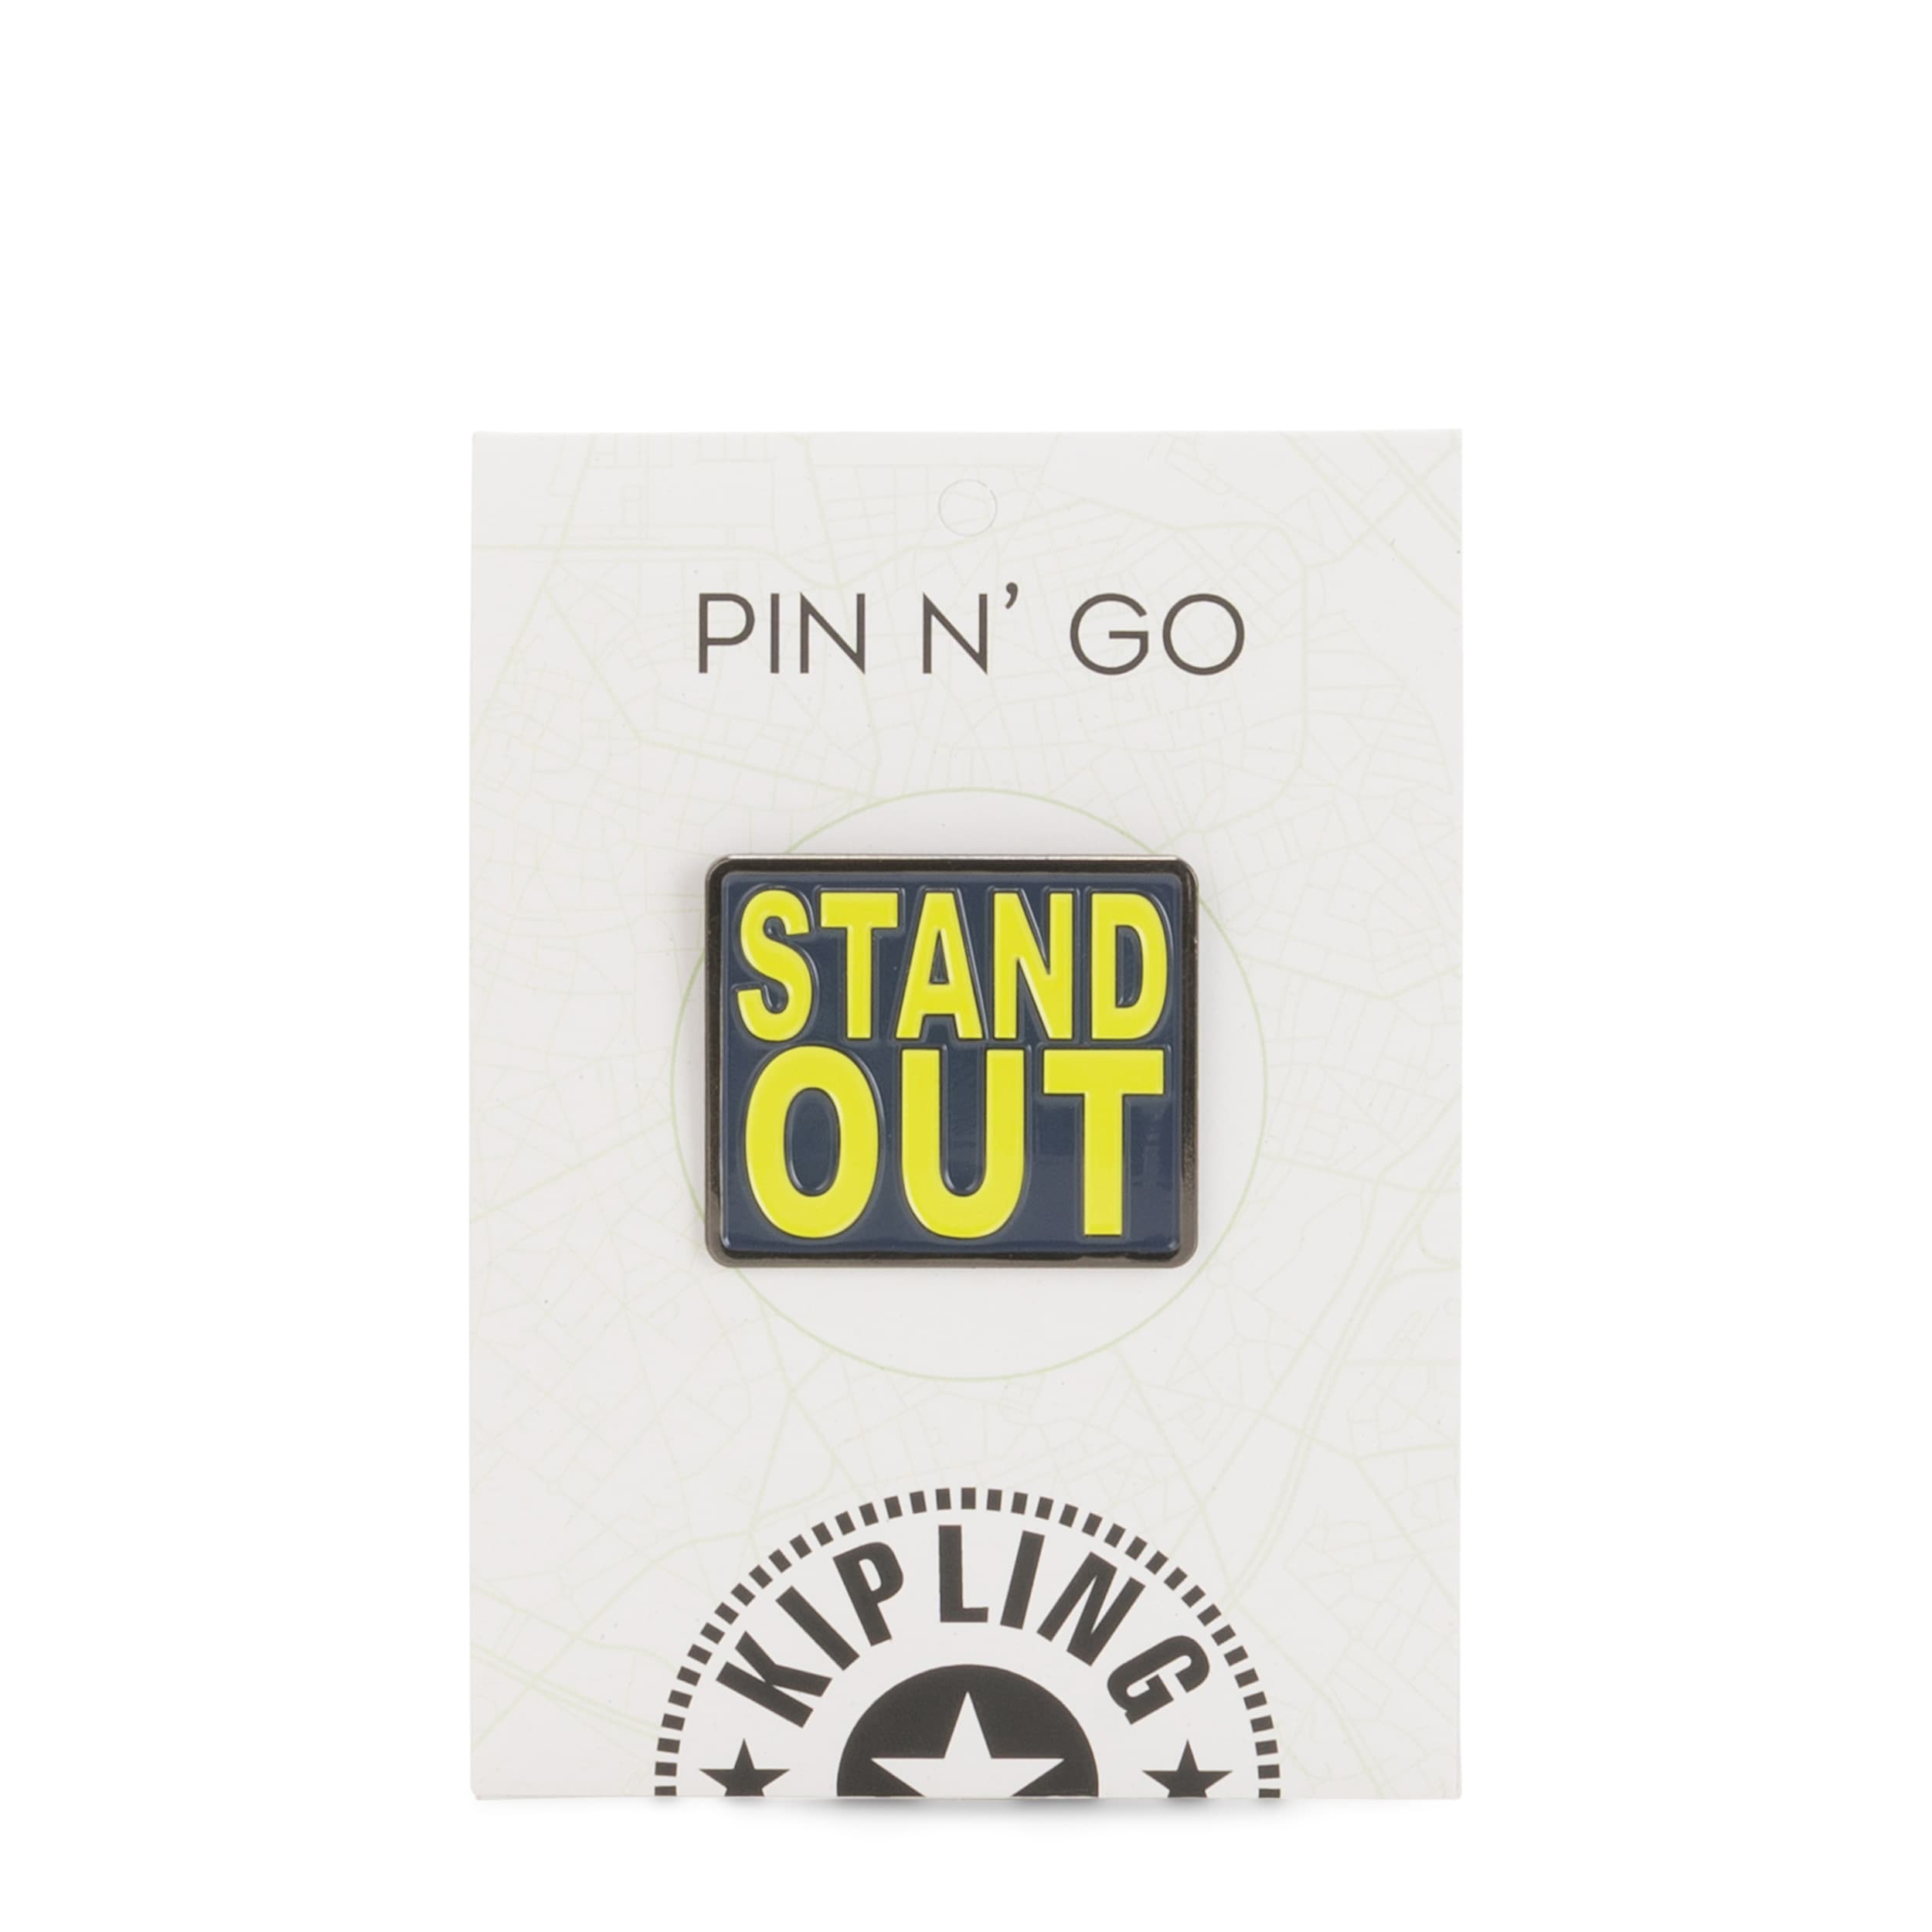 

KIPLING Accessories UNISEX Mix Col SS20 STAND OUT PIN